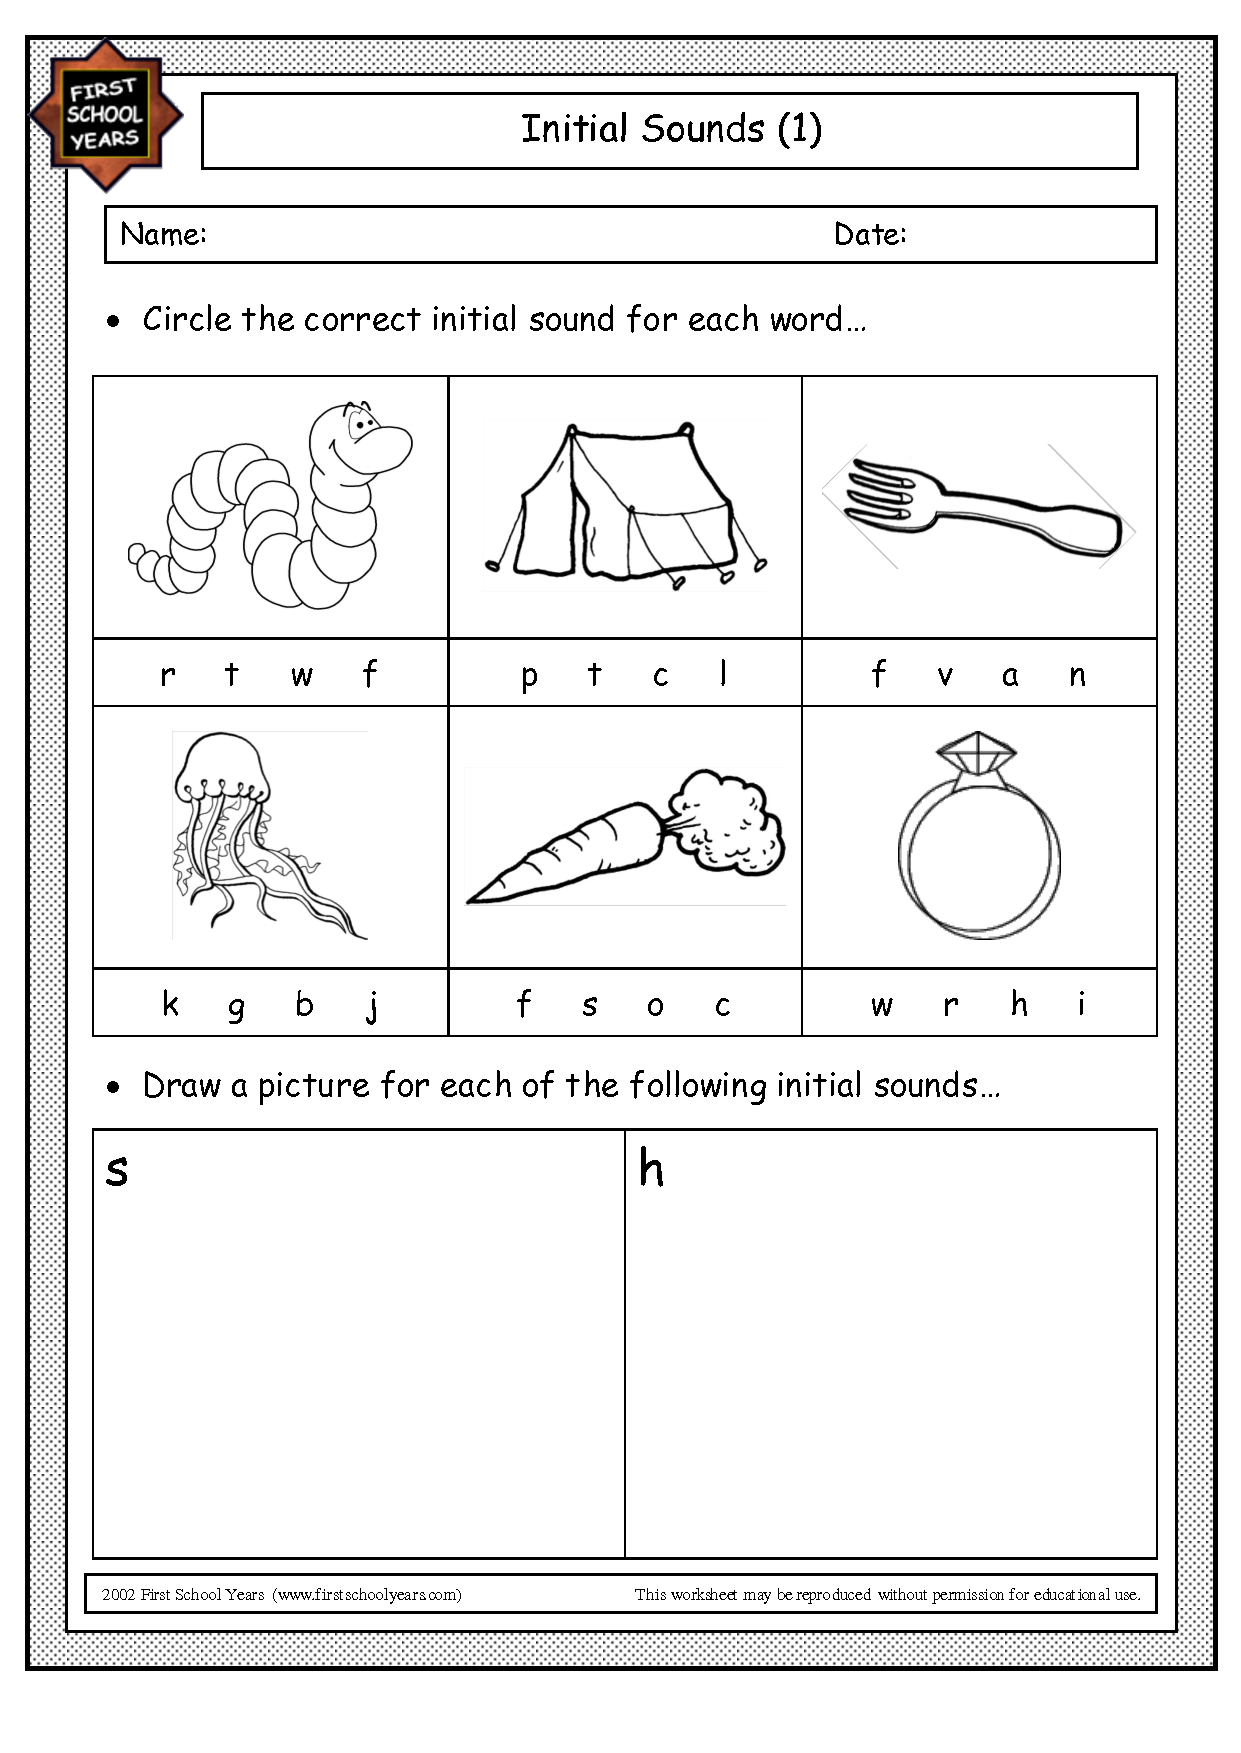 8 Best Images of Ng Phonics Worksheets - First Grade SH Words, Jolly